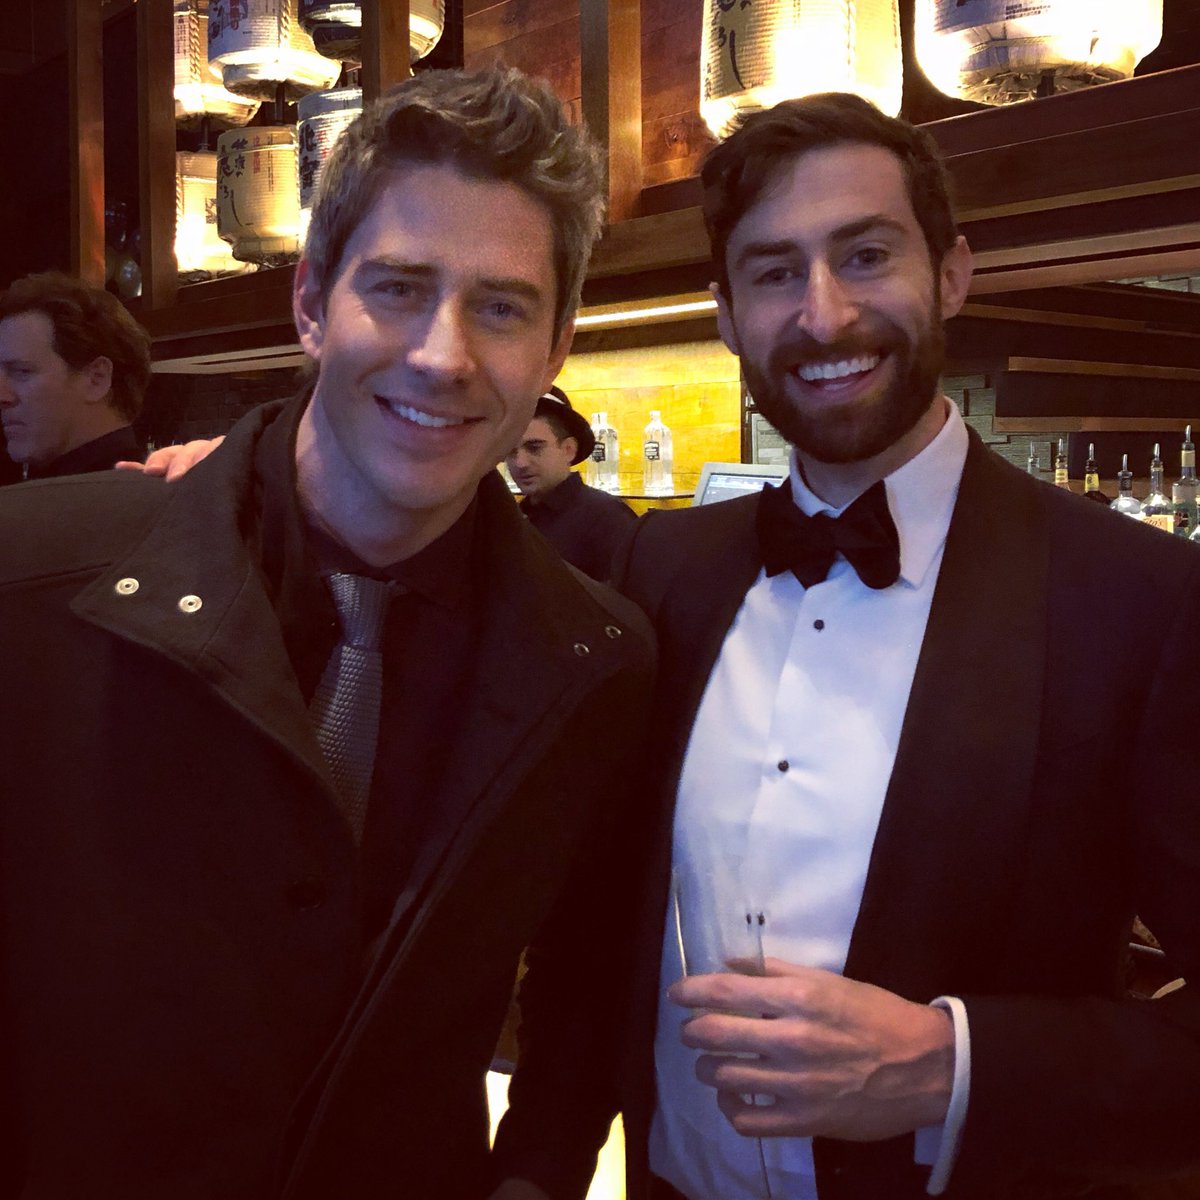 Bachelor 22 - Arie Luyendyk Jr - FAN FORUM - General Discussion  - *Sleuthing Spoilers* - Page 17 DSgdpiFVQAAzmNx